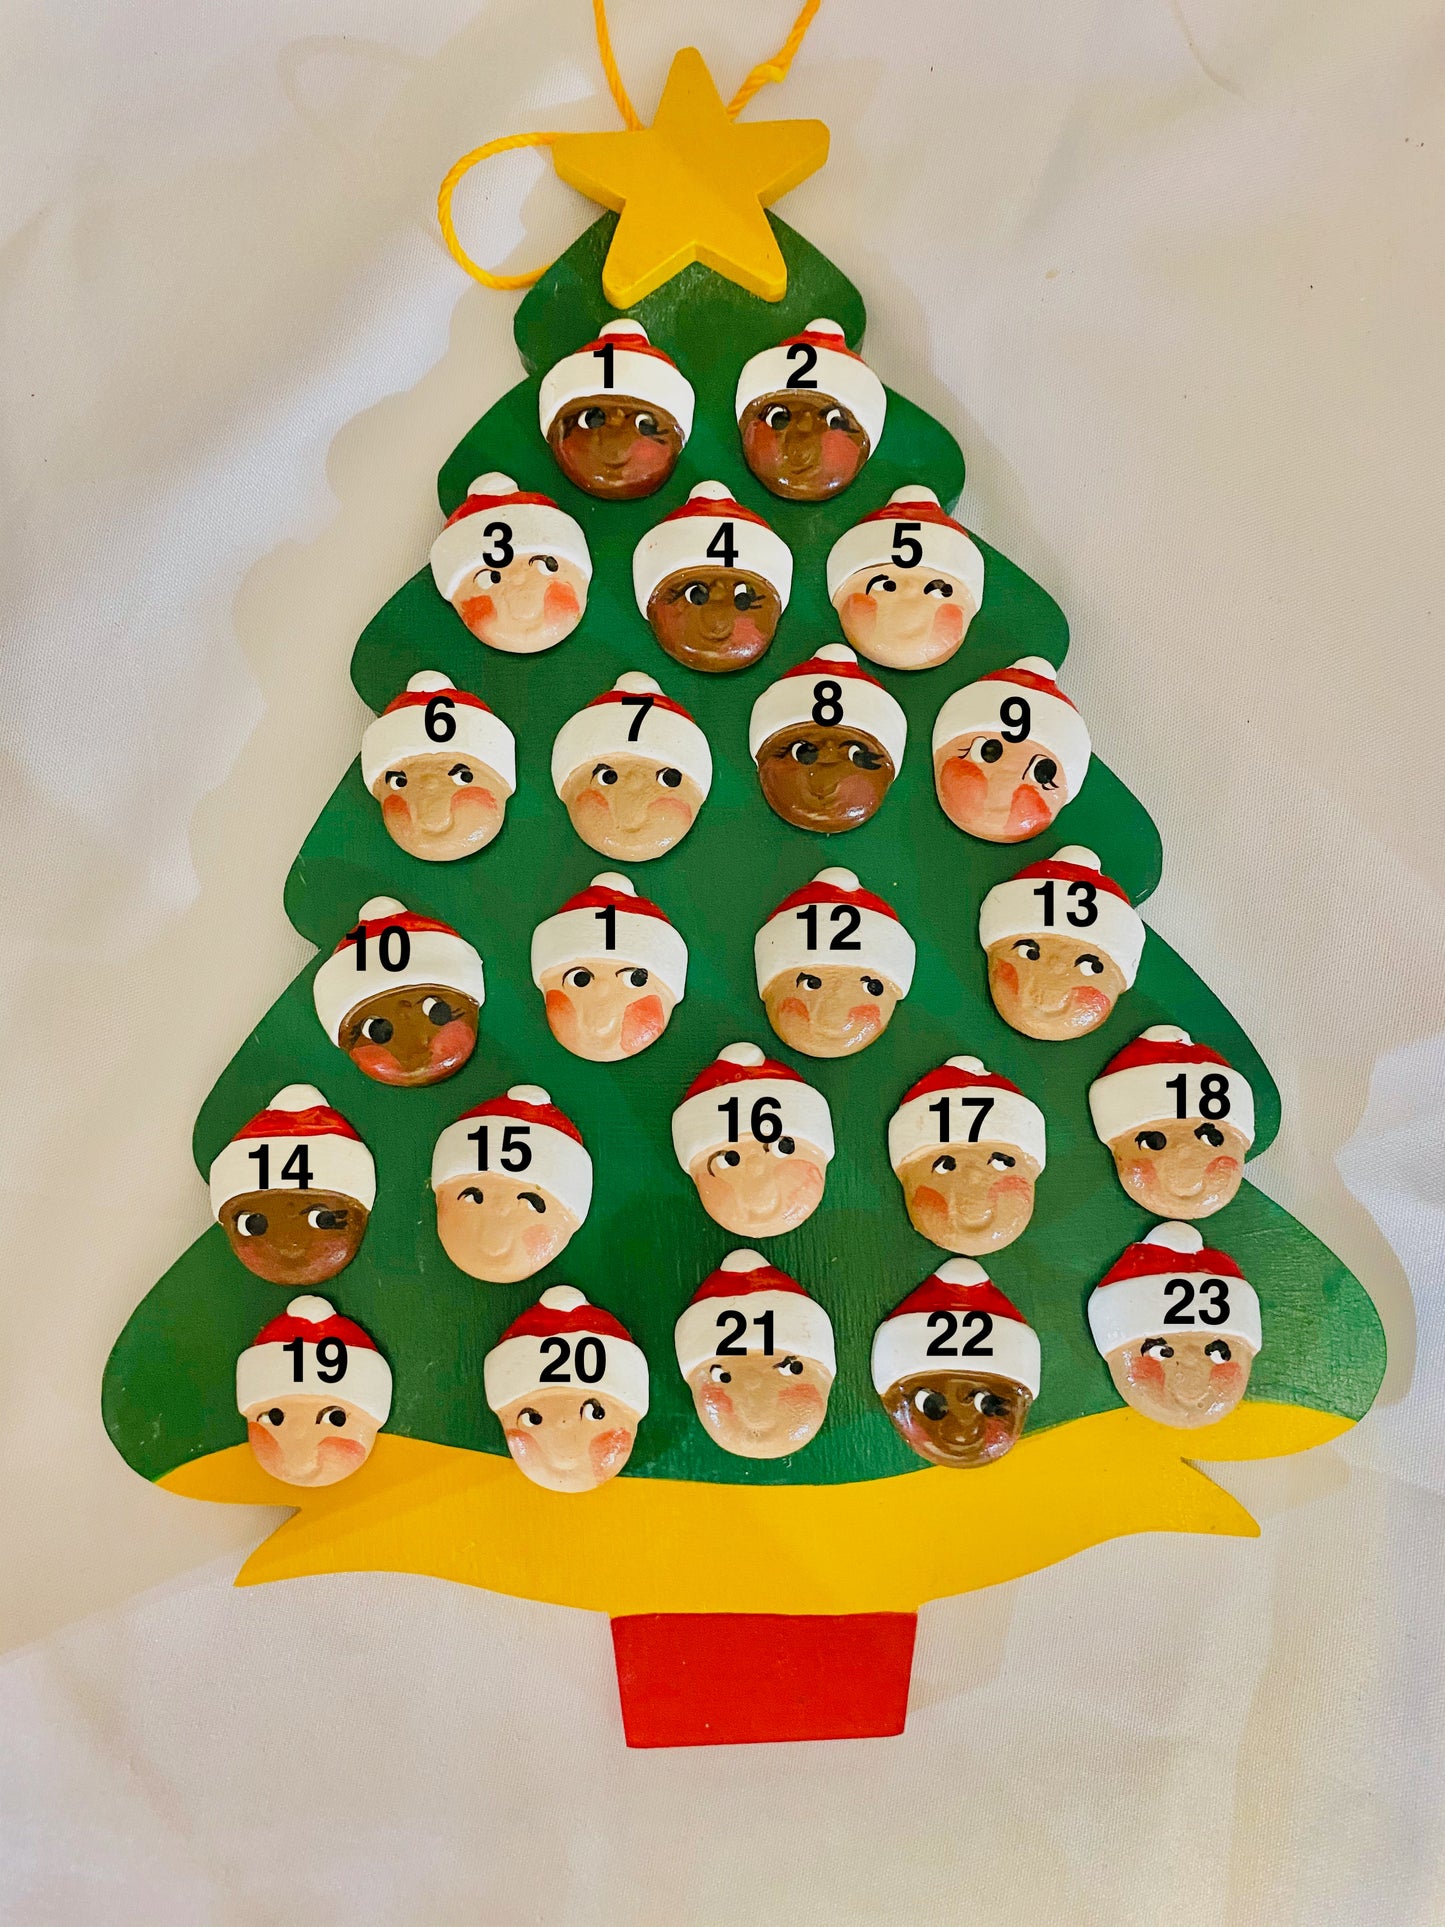 Personalized Ornament 23 Santa Faces on a Christmas Tree  8.5" x 7"